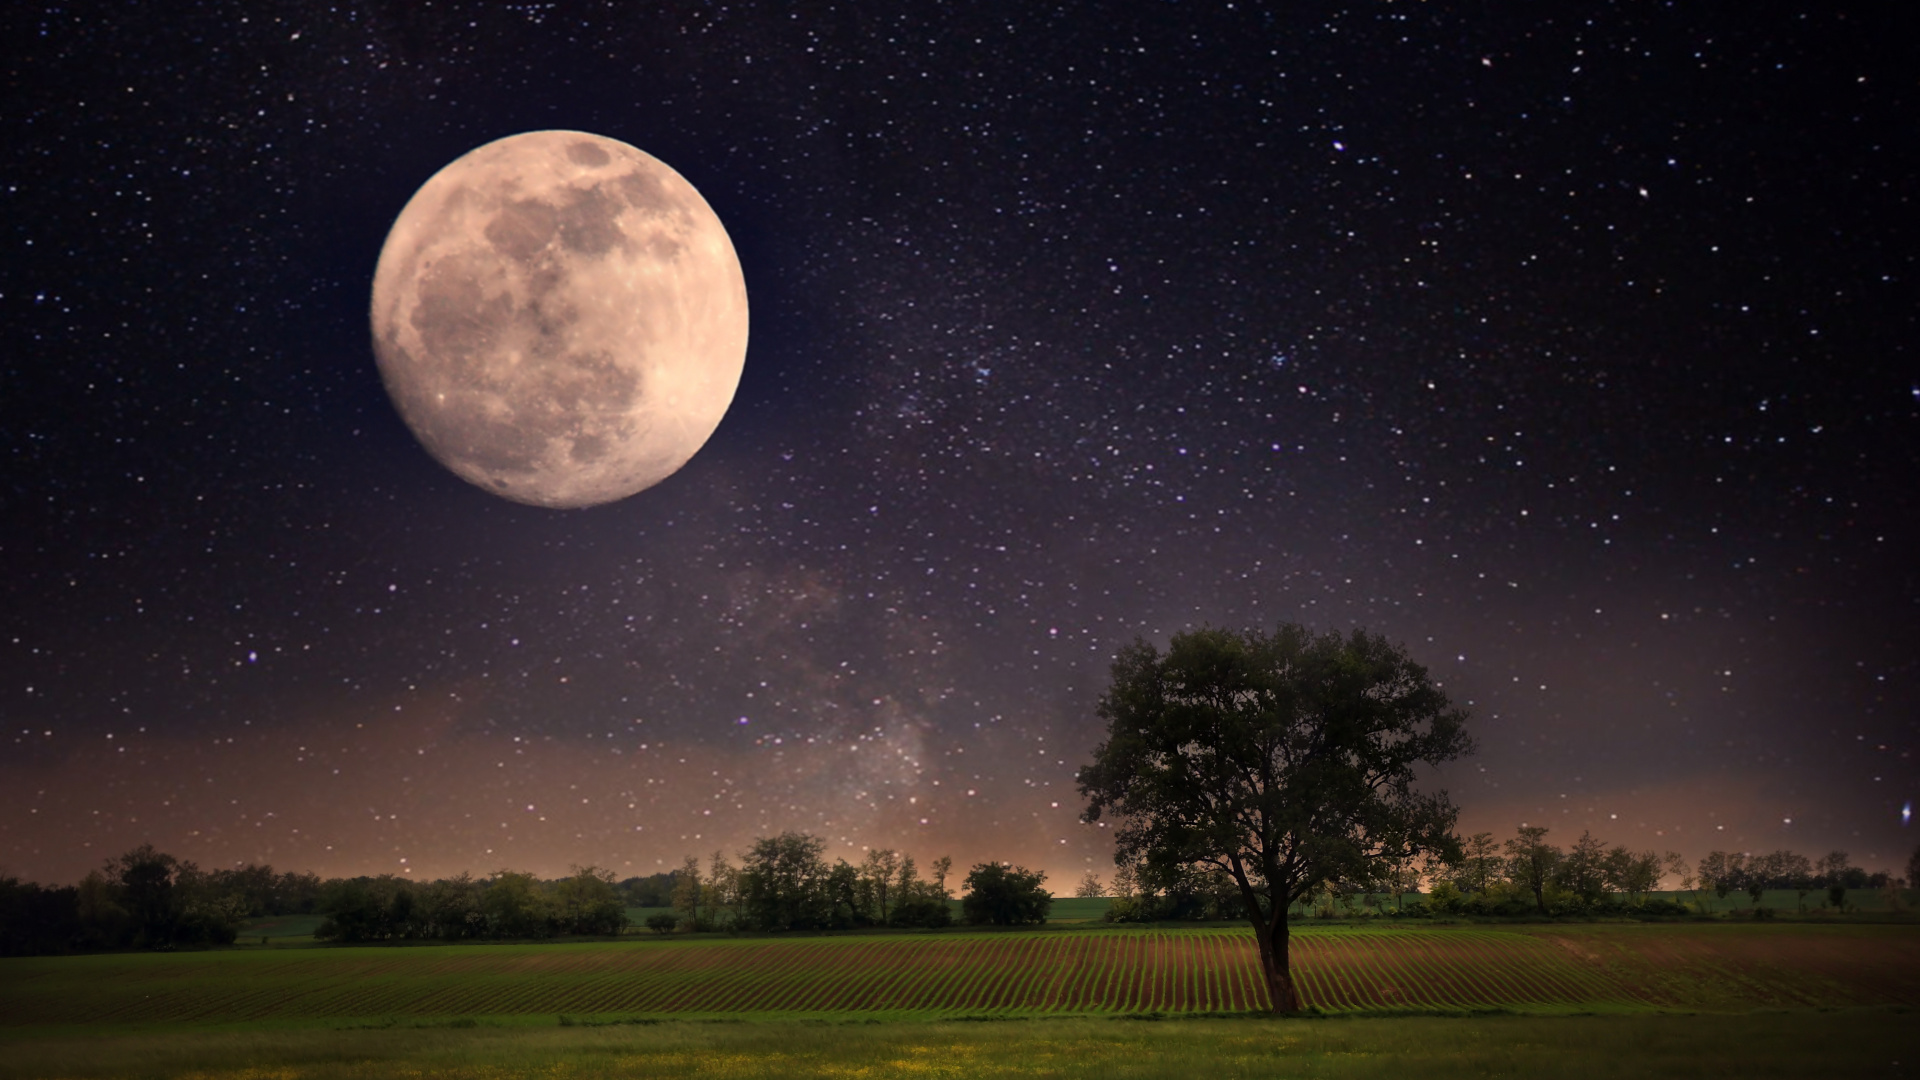 Green Grass Field With Trees Under Moon. Wallpaper in 1920x1080 Resolution